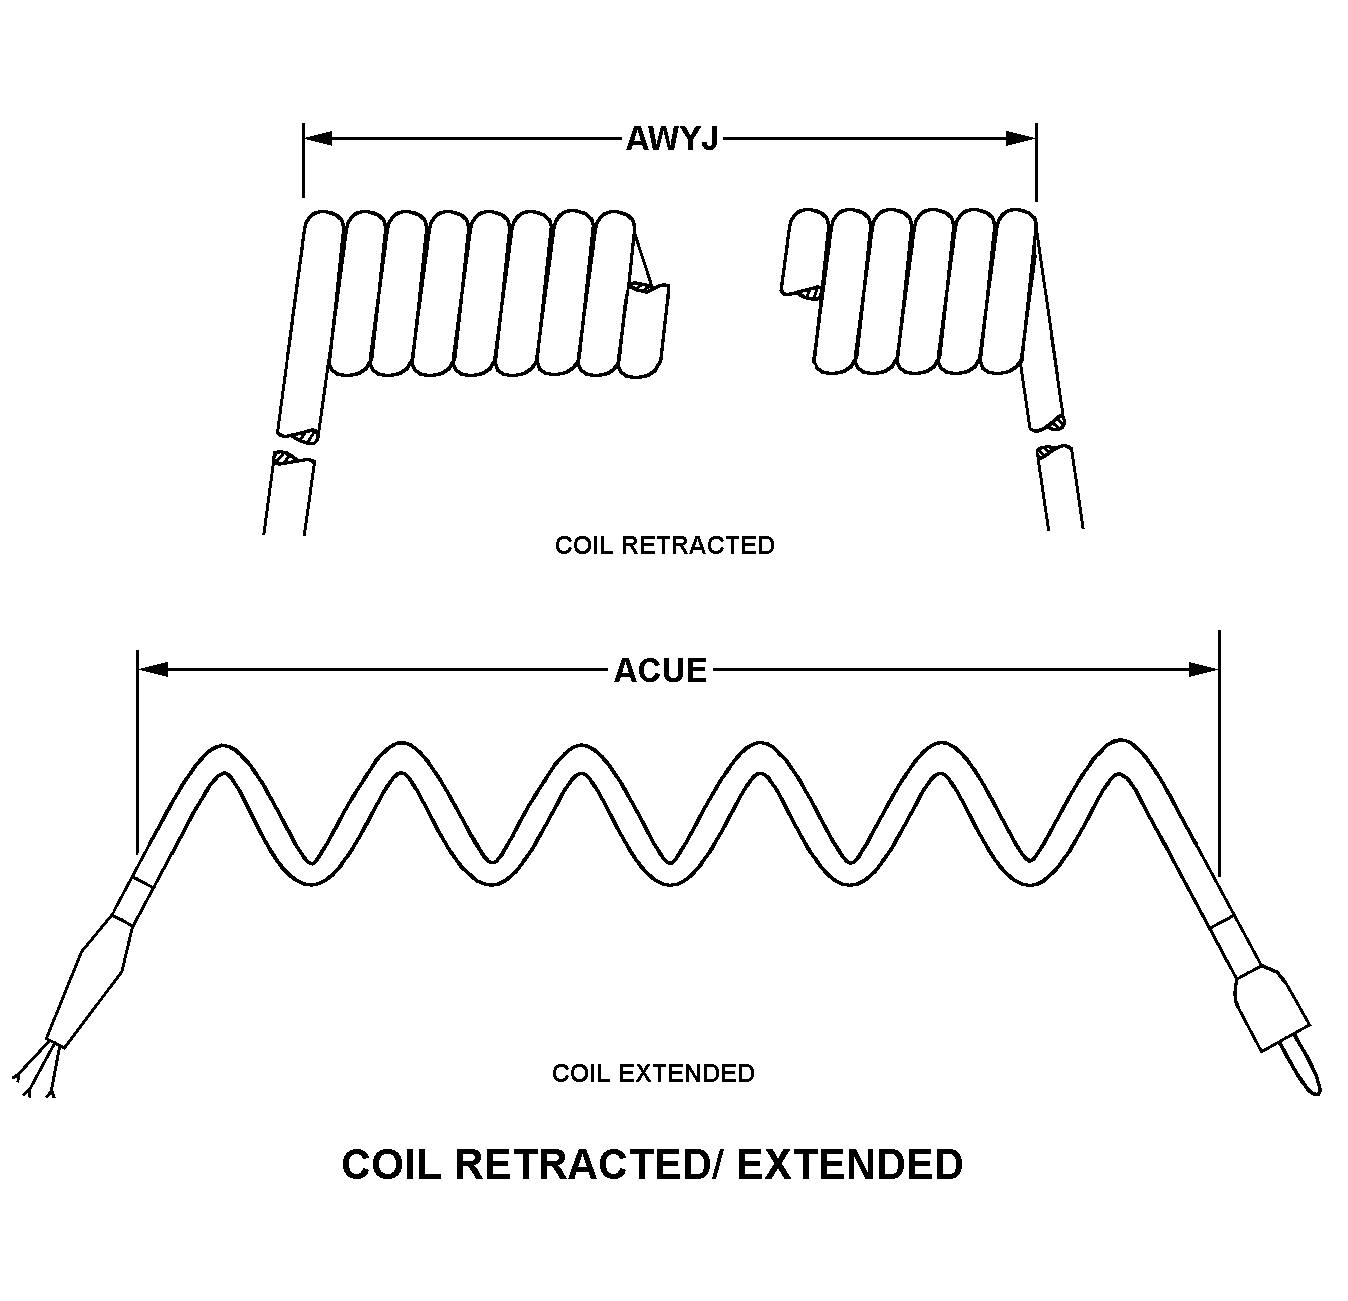 COIL RETRACTED/EXTENDED style nsn 5995-01-406-8936